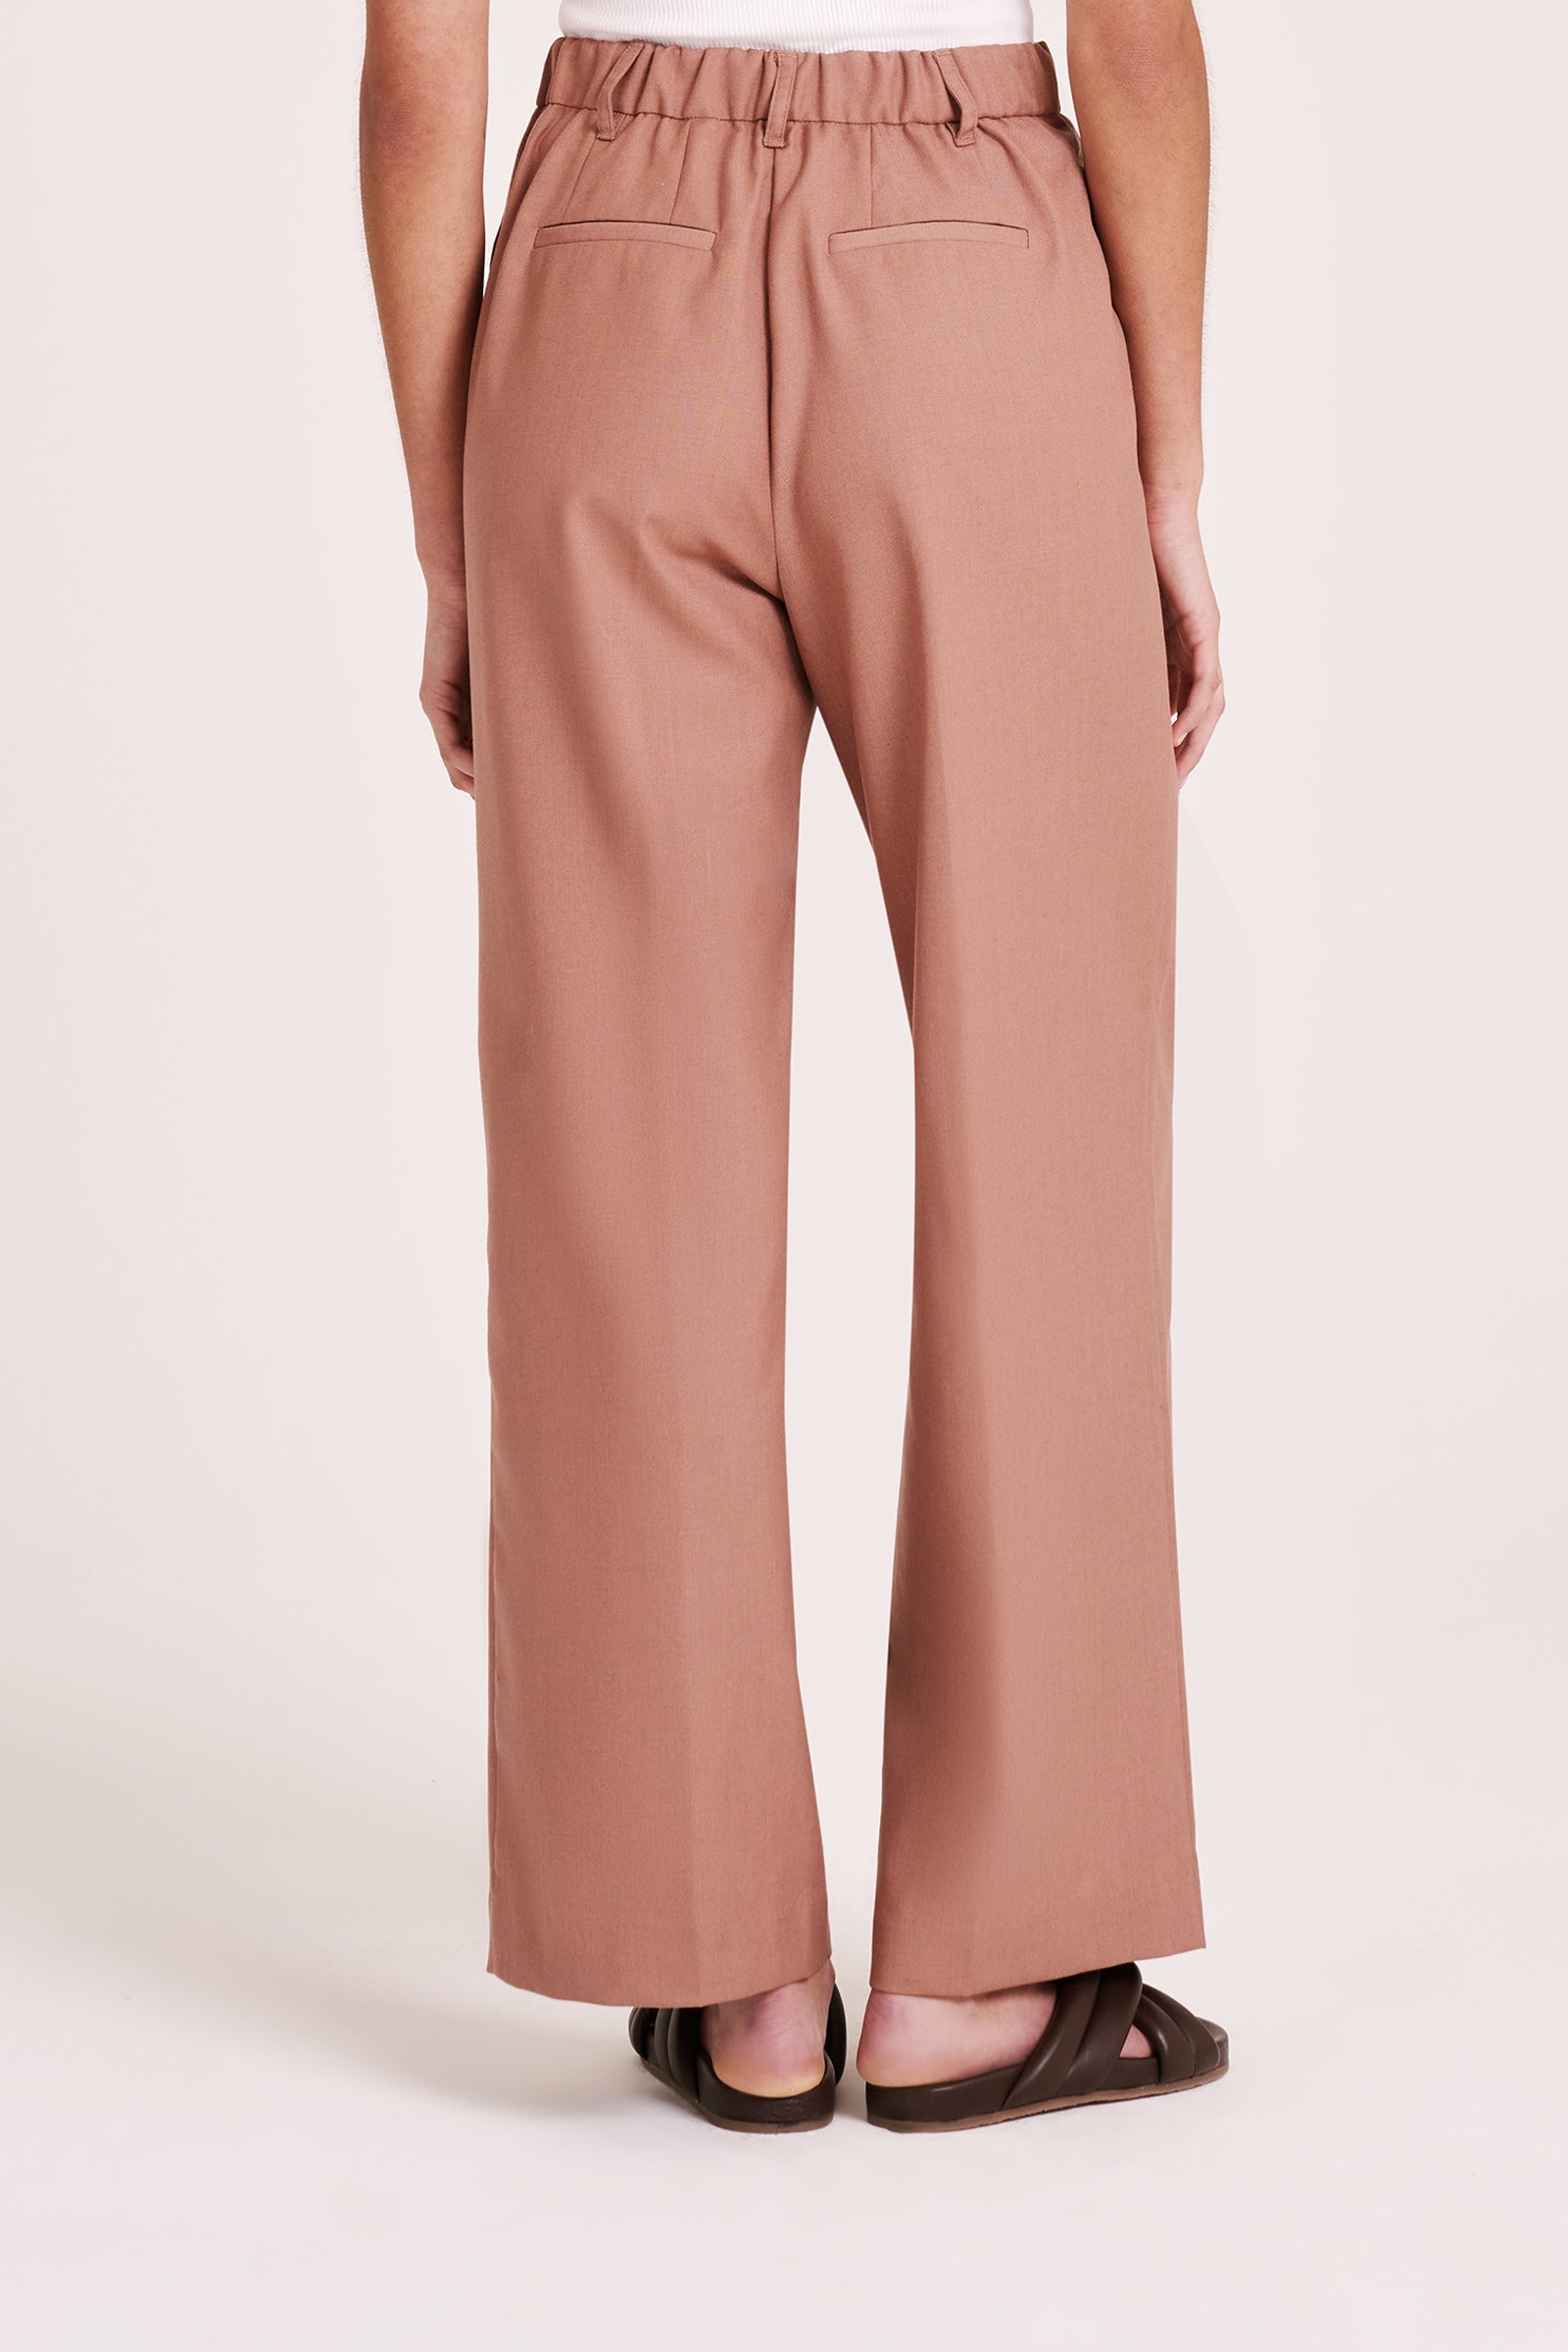 Monte Tailored Pant Russet 